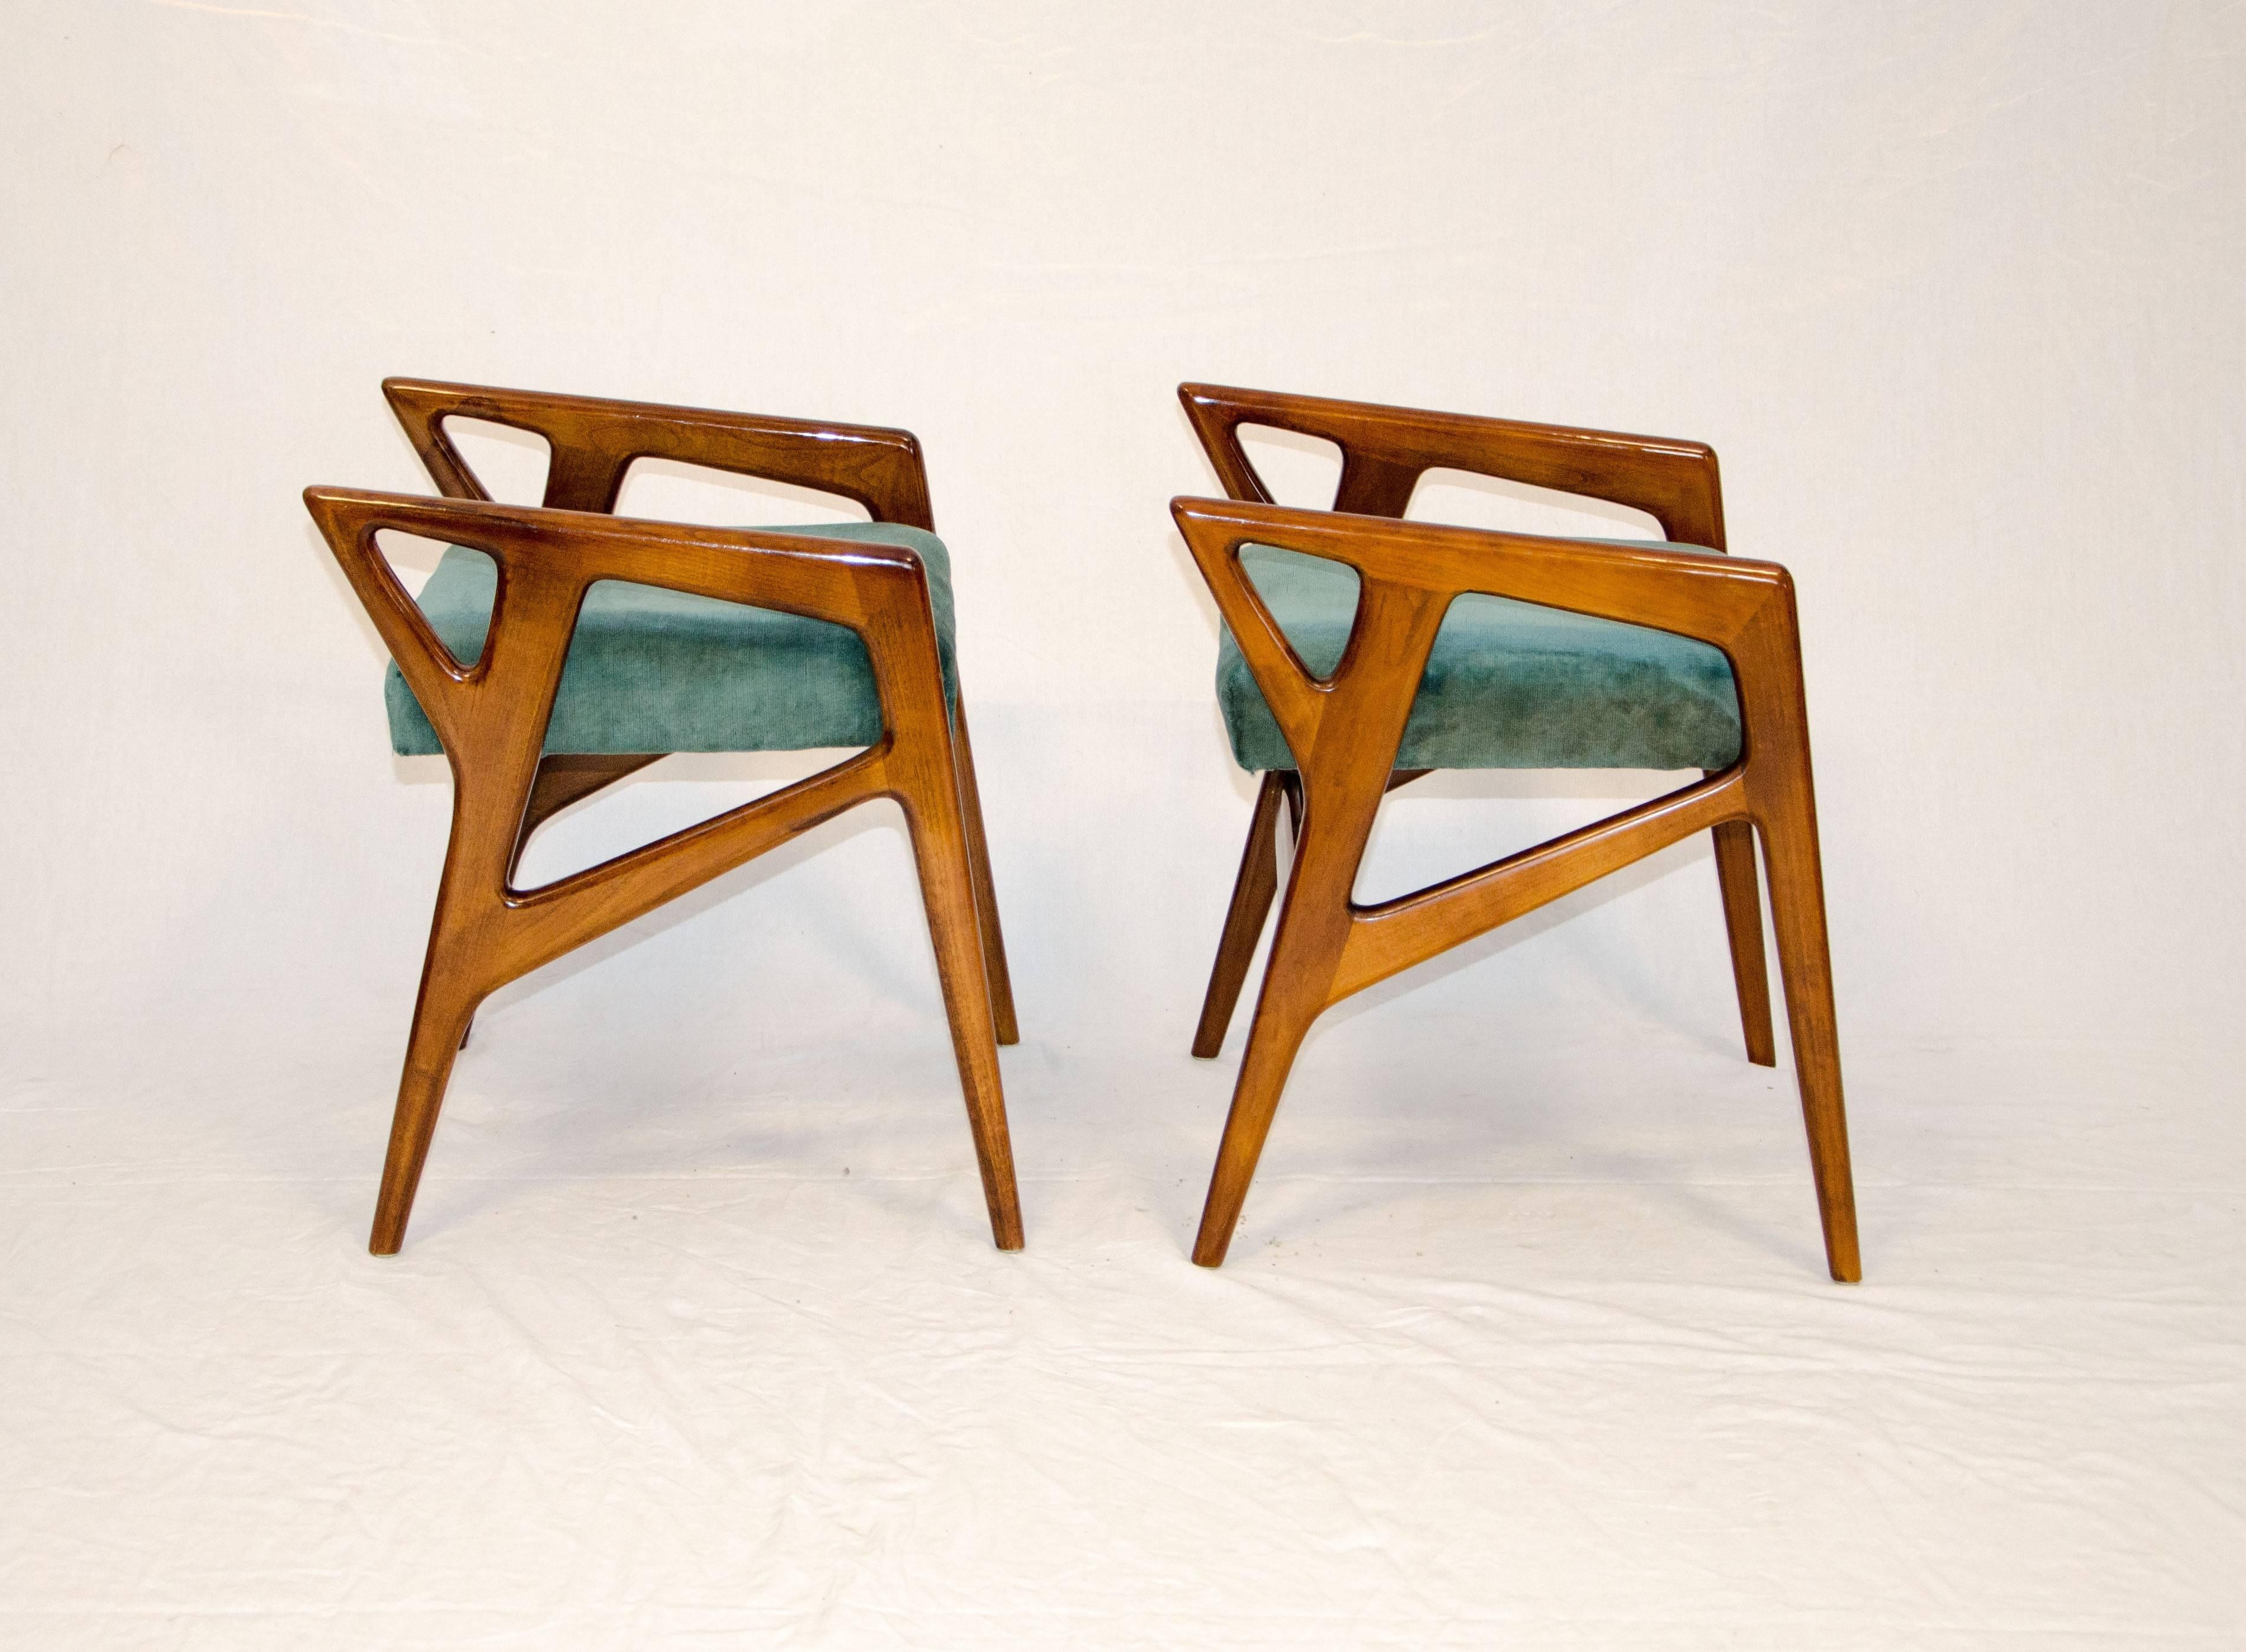 Rare pair of arm stools or bench seats designed by Gio Ponti. Provenance provided from Gio Ponti Archives is in last photo.